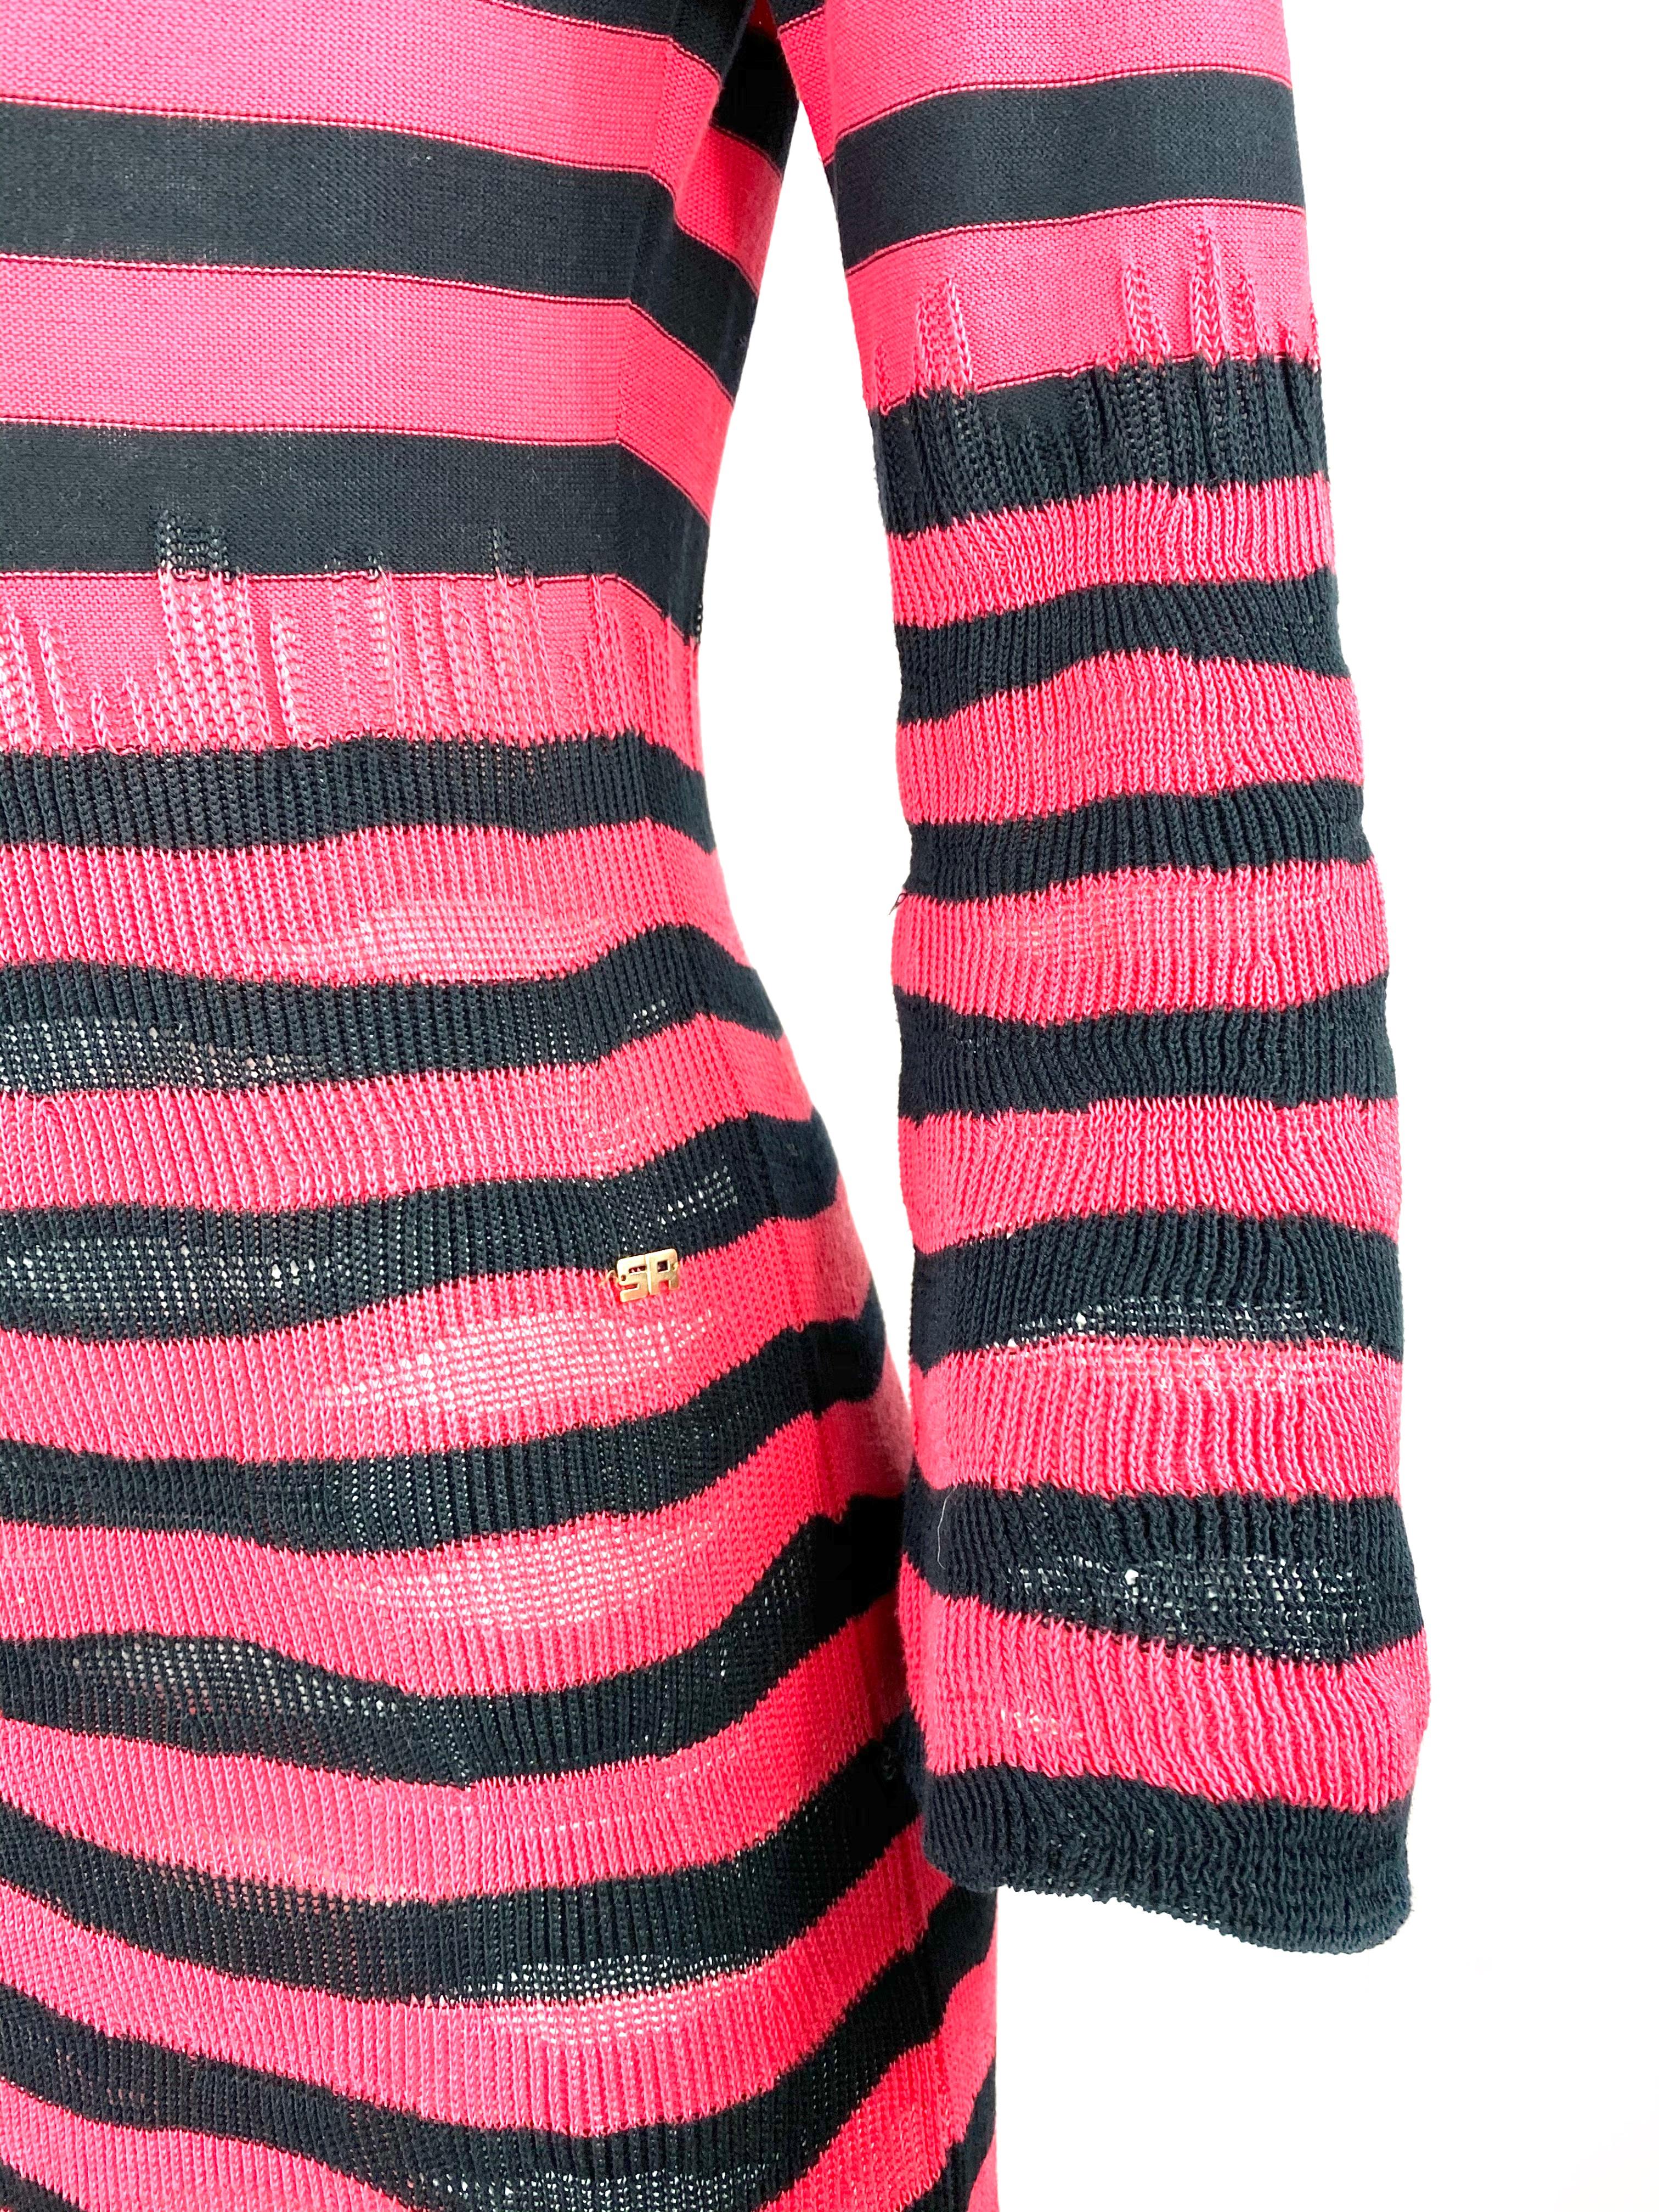 Sonia Rykiel Paris Pink and Navy Striped Maxi Dress w/ Flower Brooch Size 38 For Sale 1